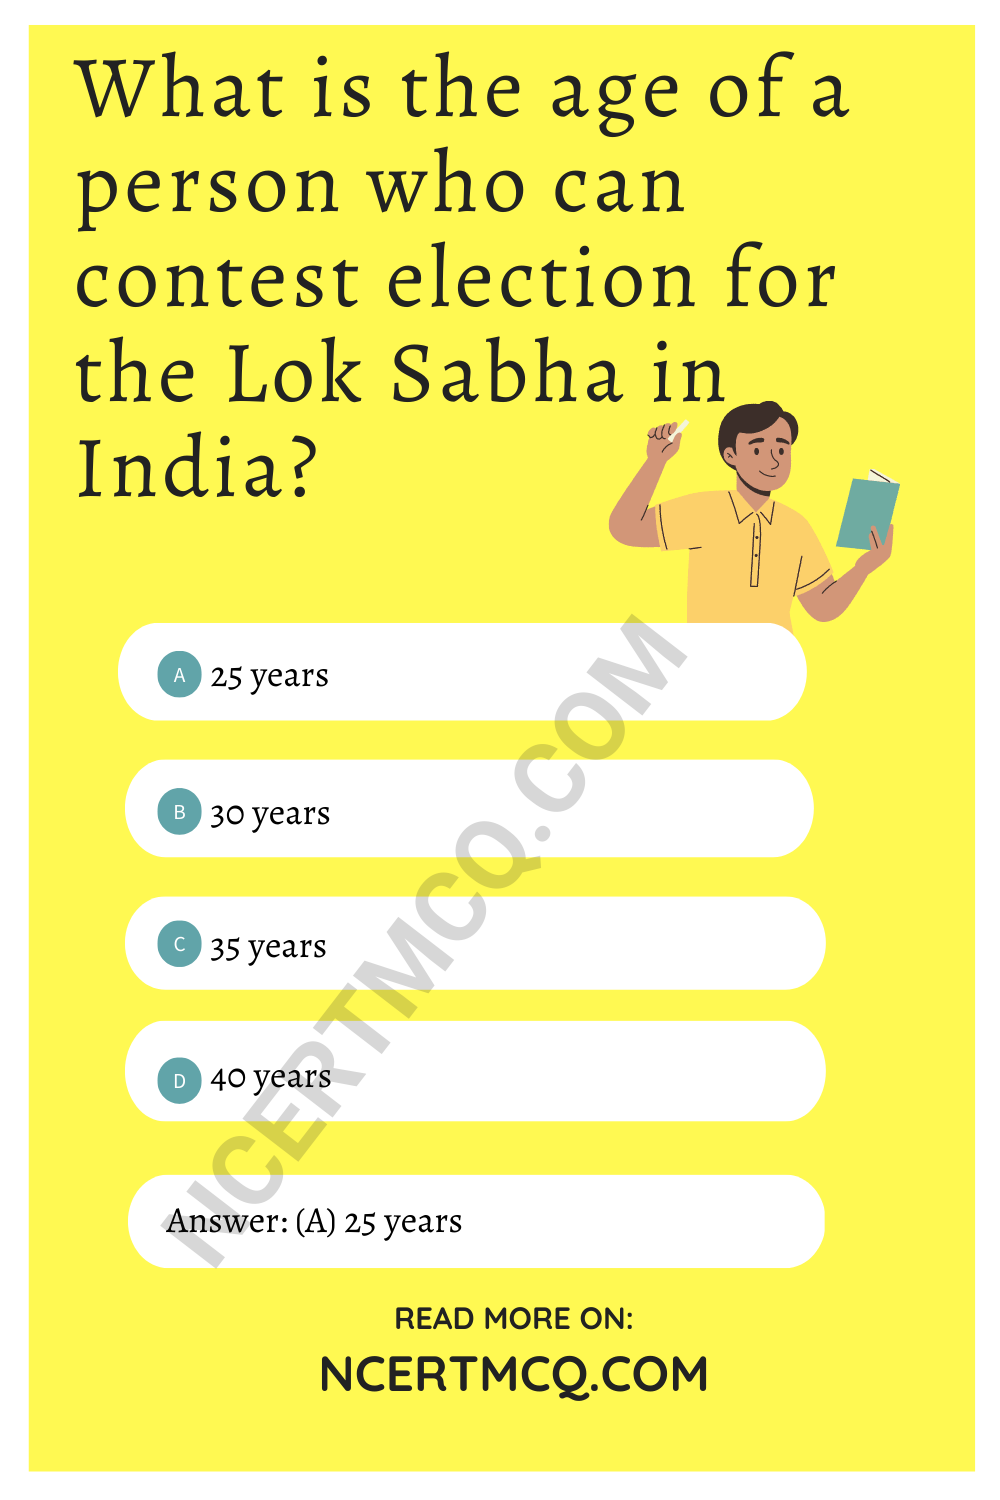 What is the age of a person who can contest election for the Lok Sabha in India?